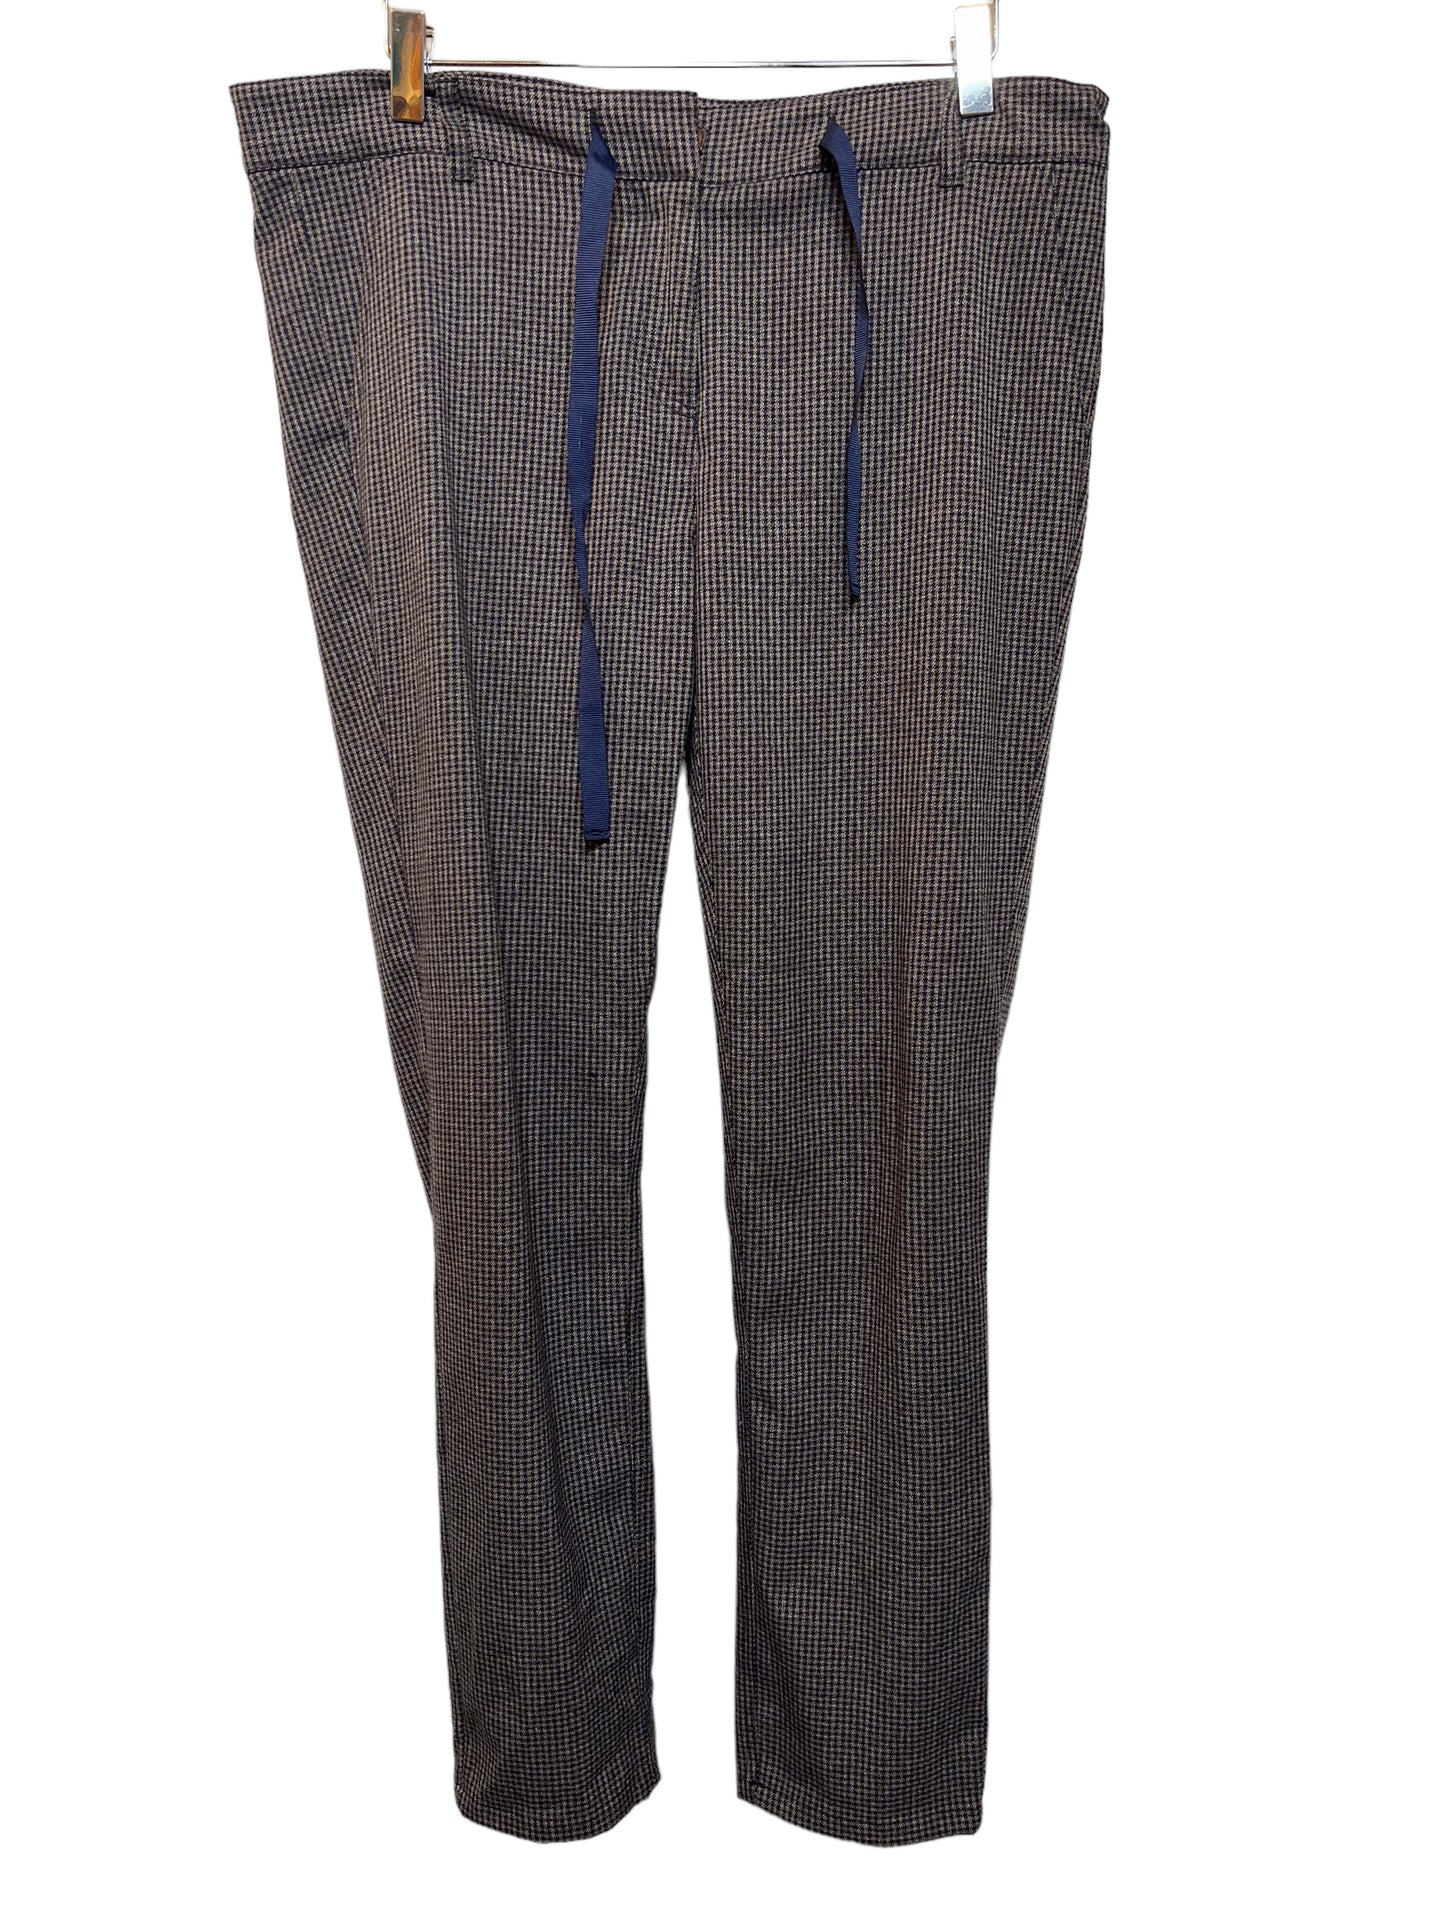 Mens Formal Trousers (34x29)